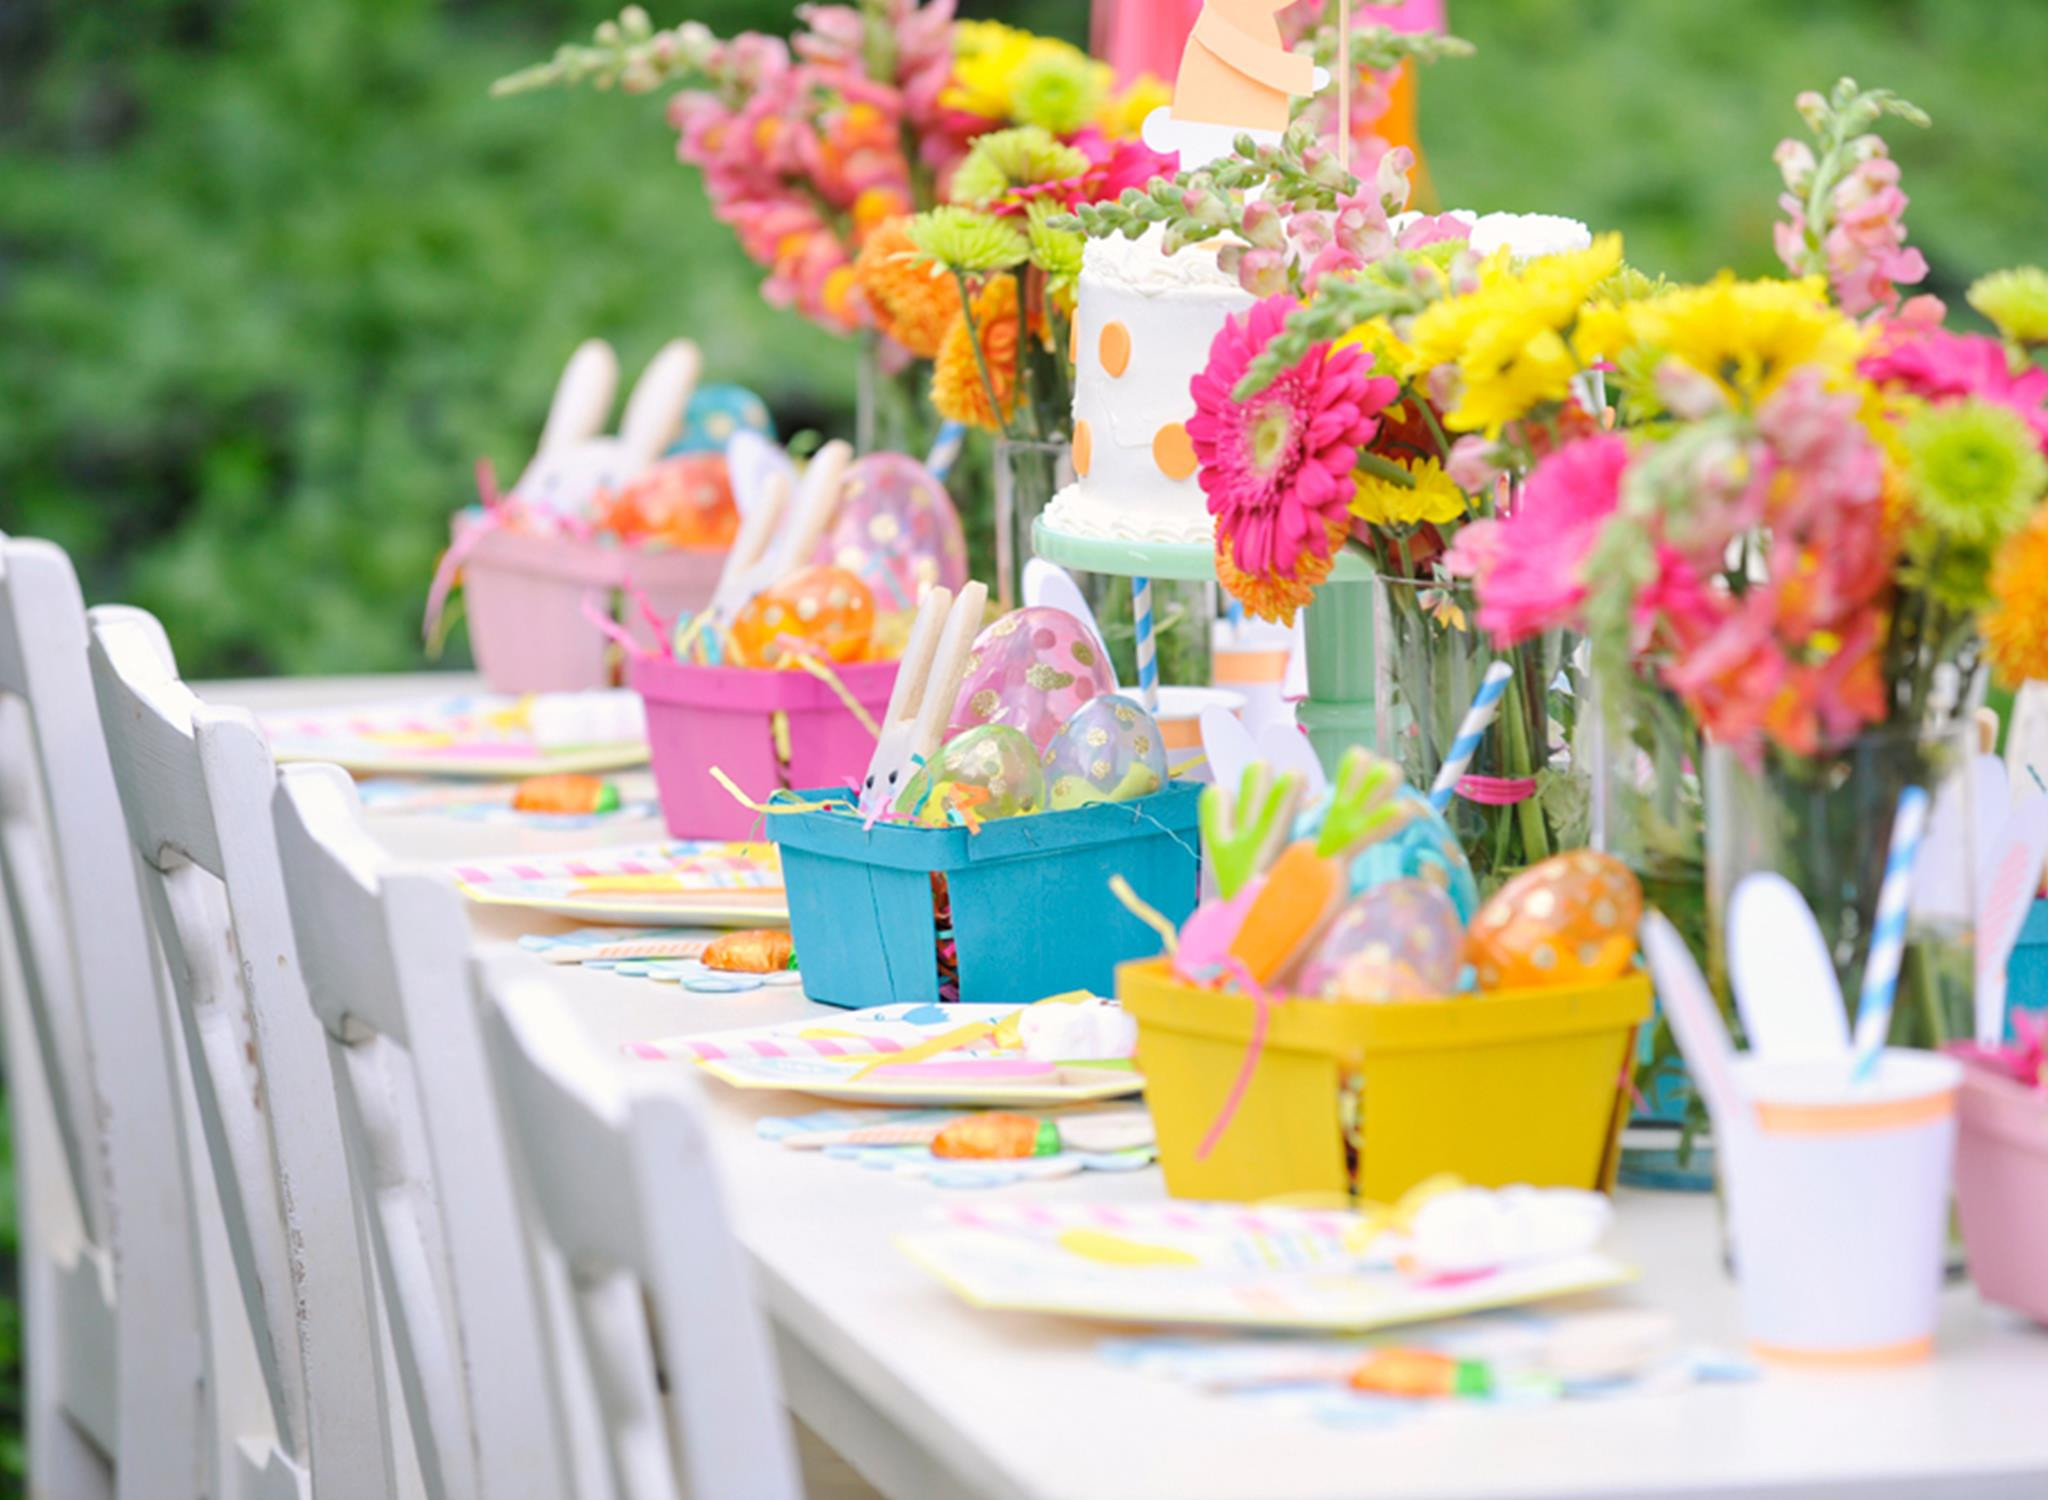 Party Ideas For Easter
 Plan a Bunny tastic Kids Easter Party Project Nursery